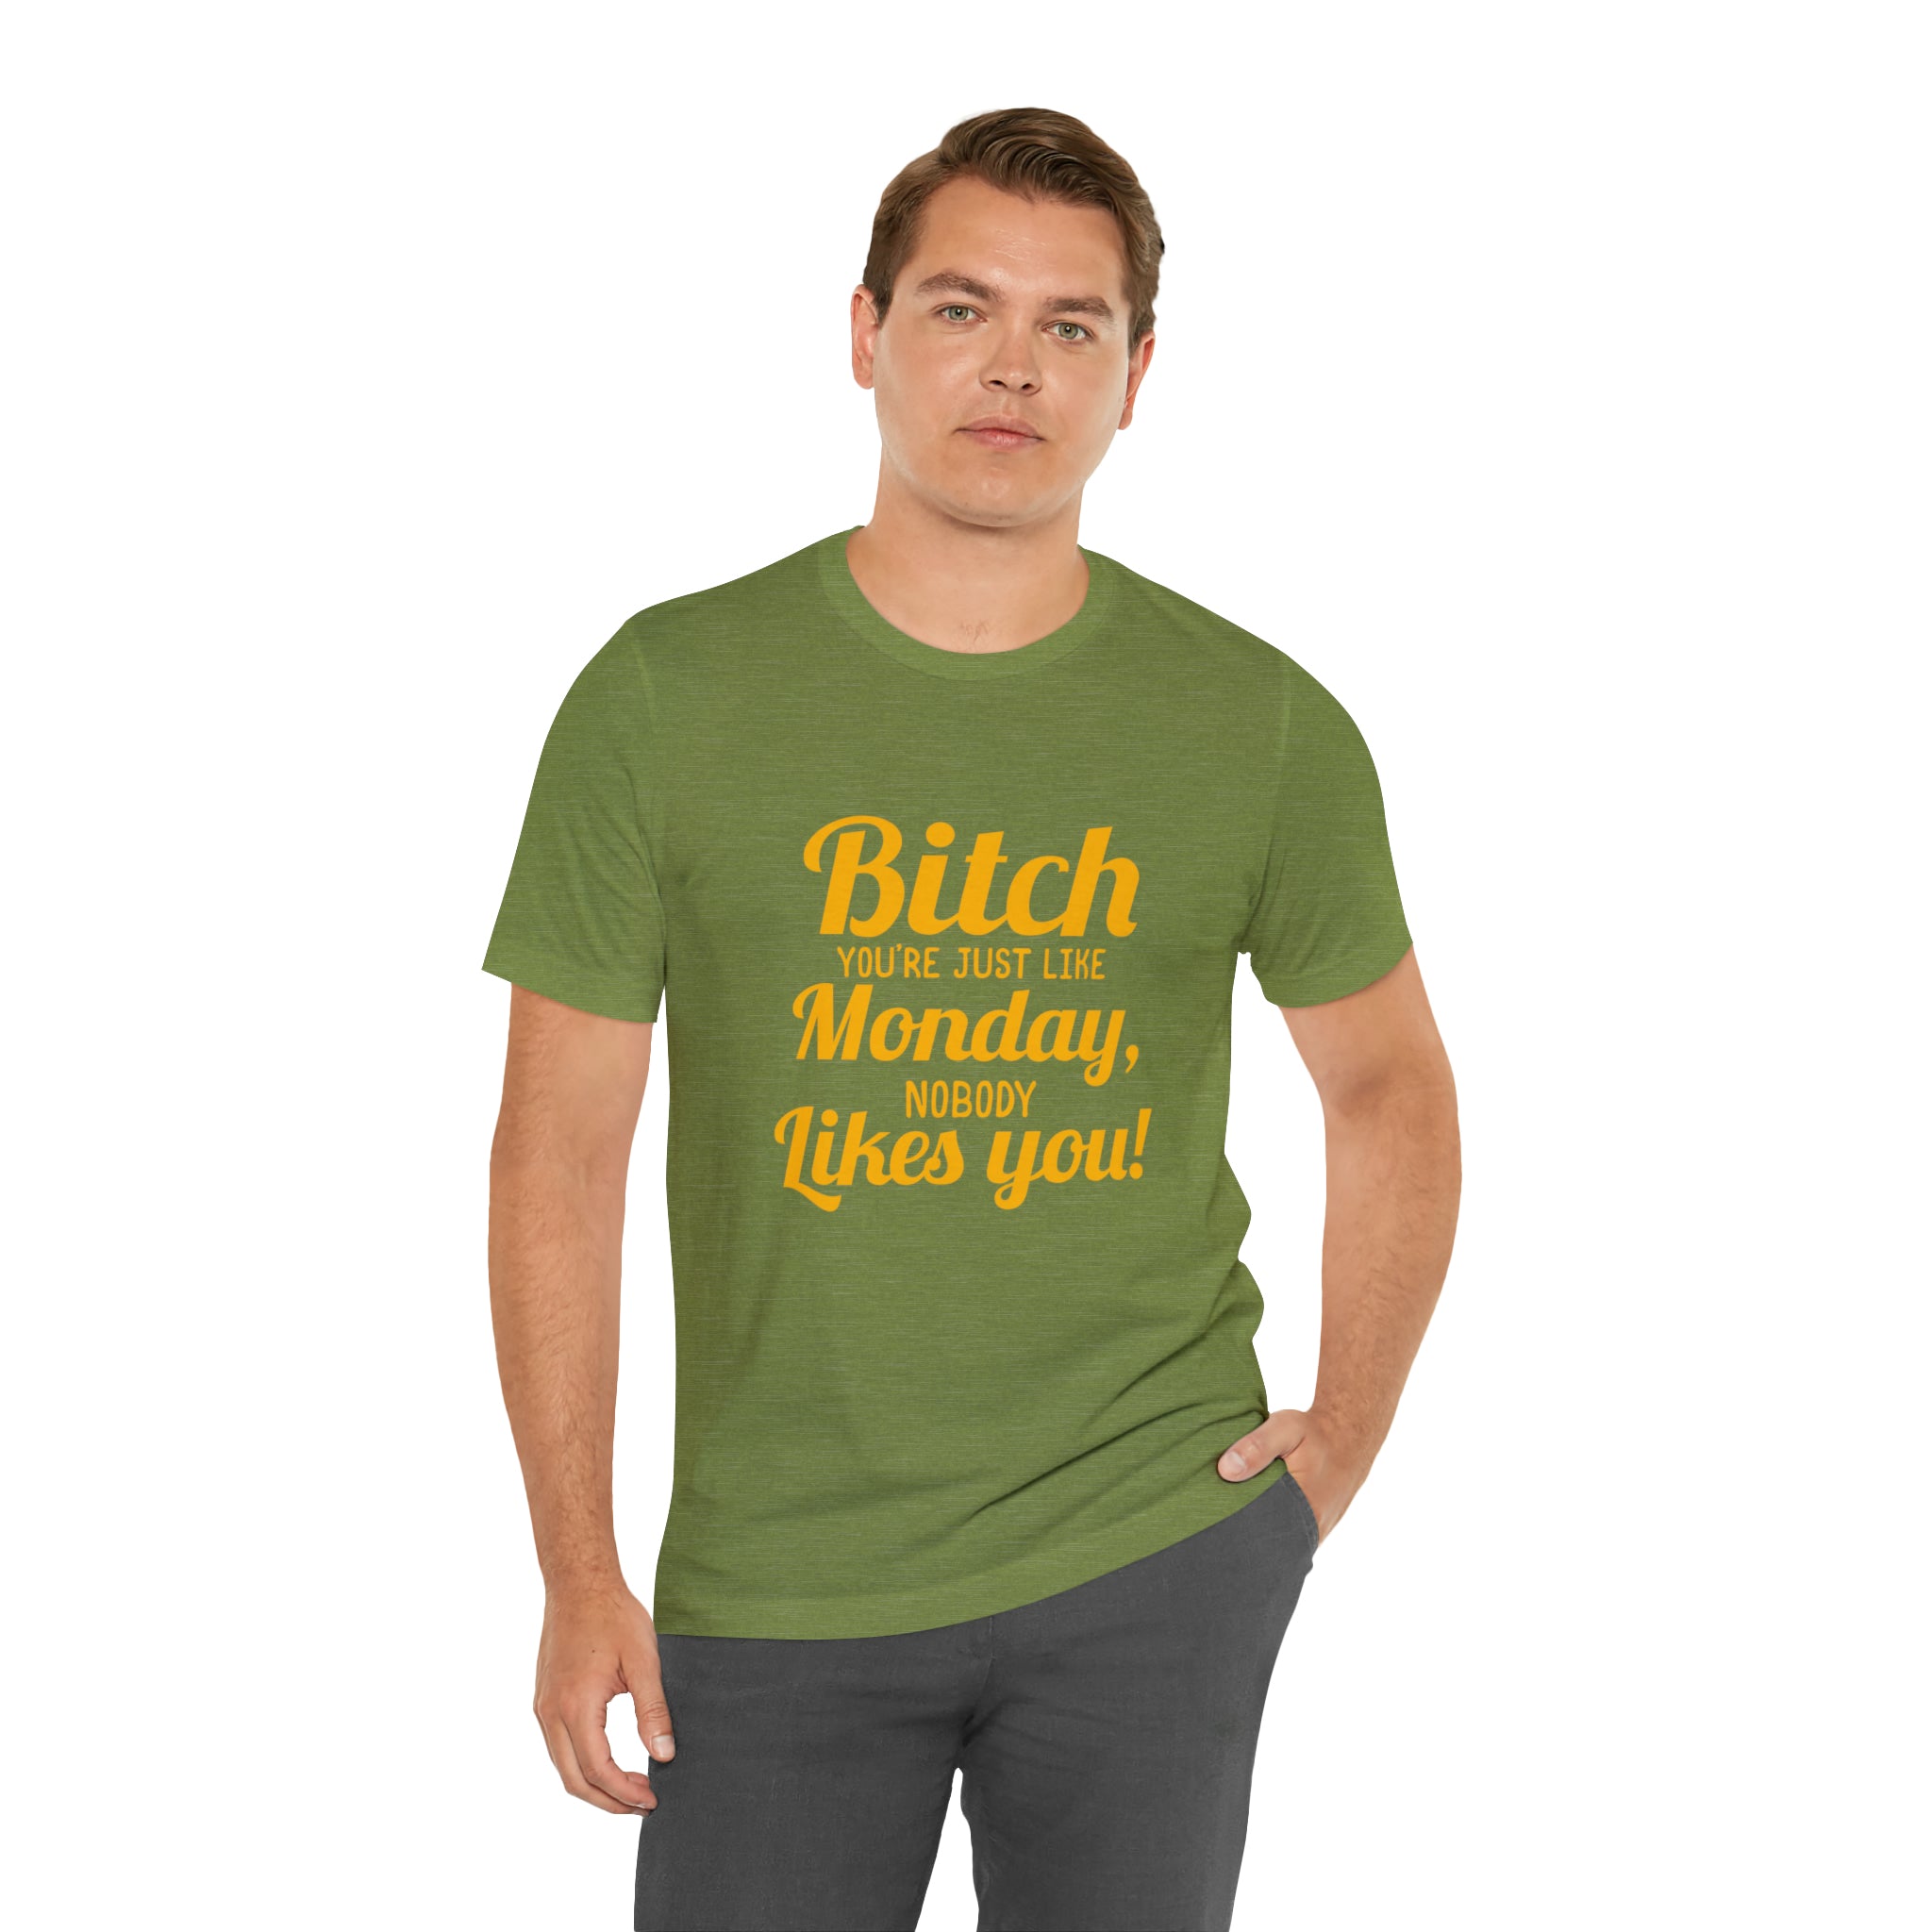 Description: Bitch you are just like Monday nobody likes you T-Shirt.